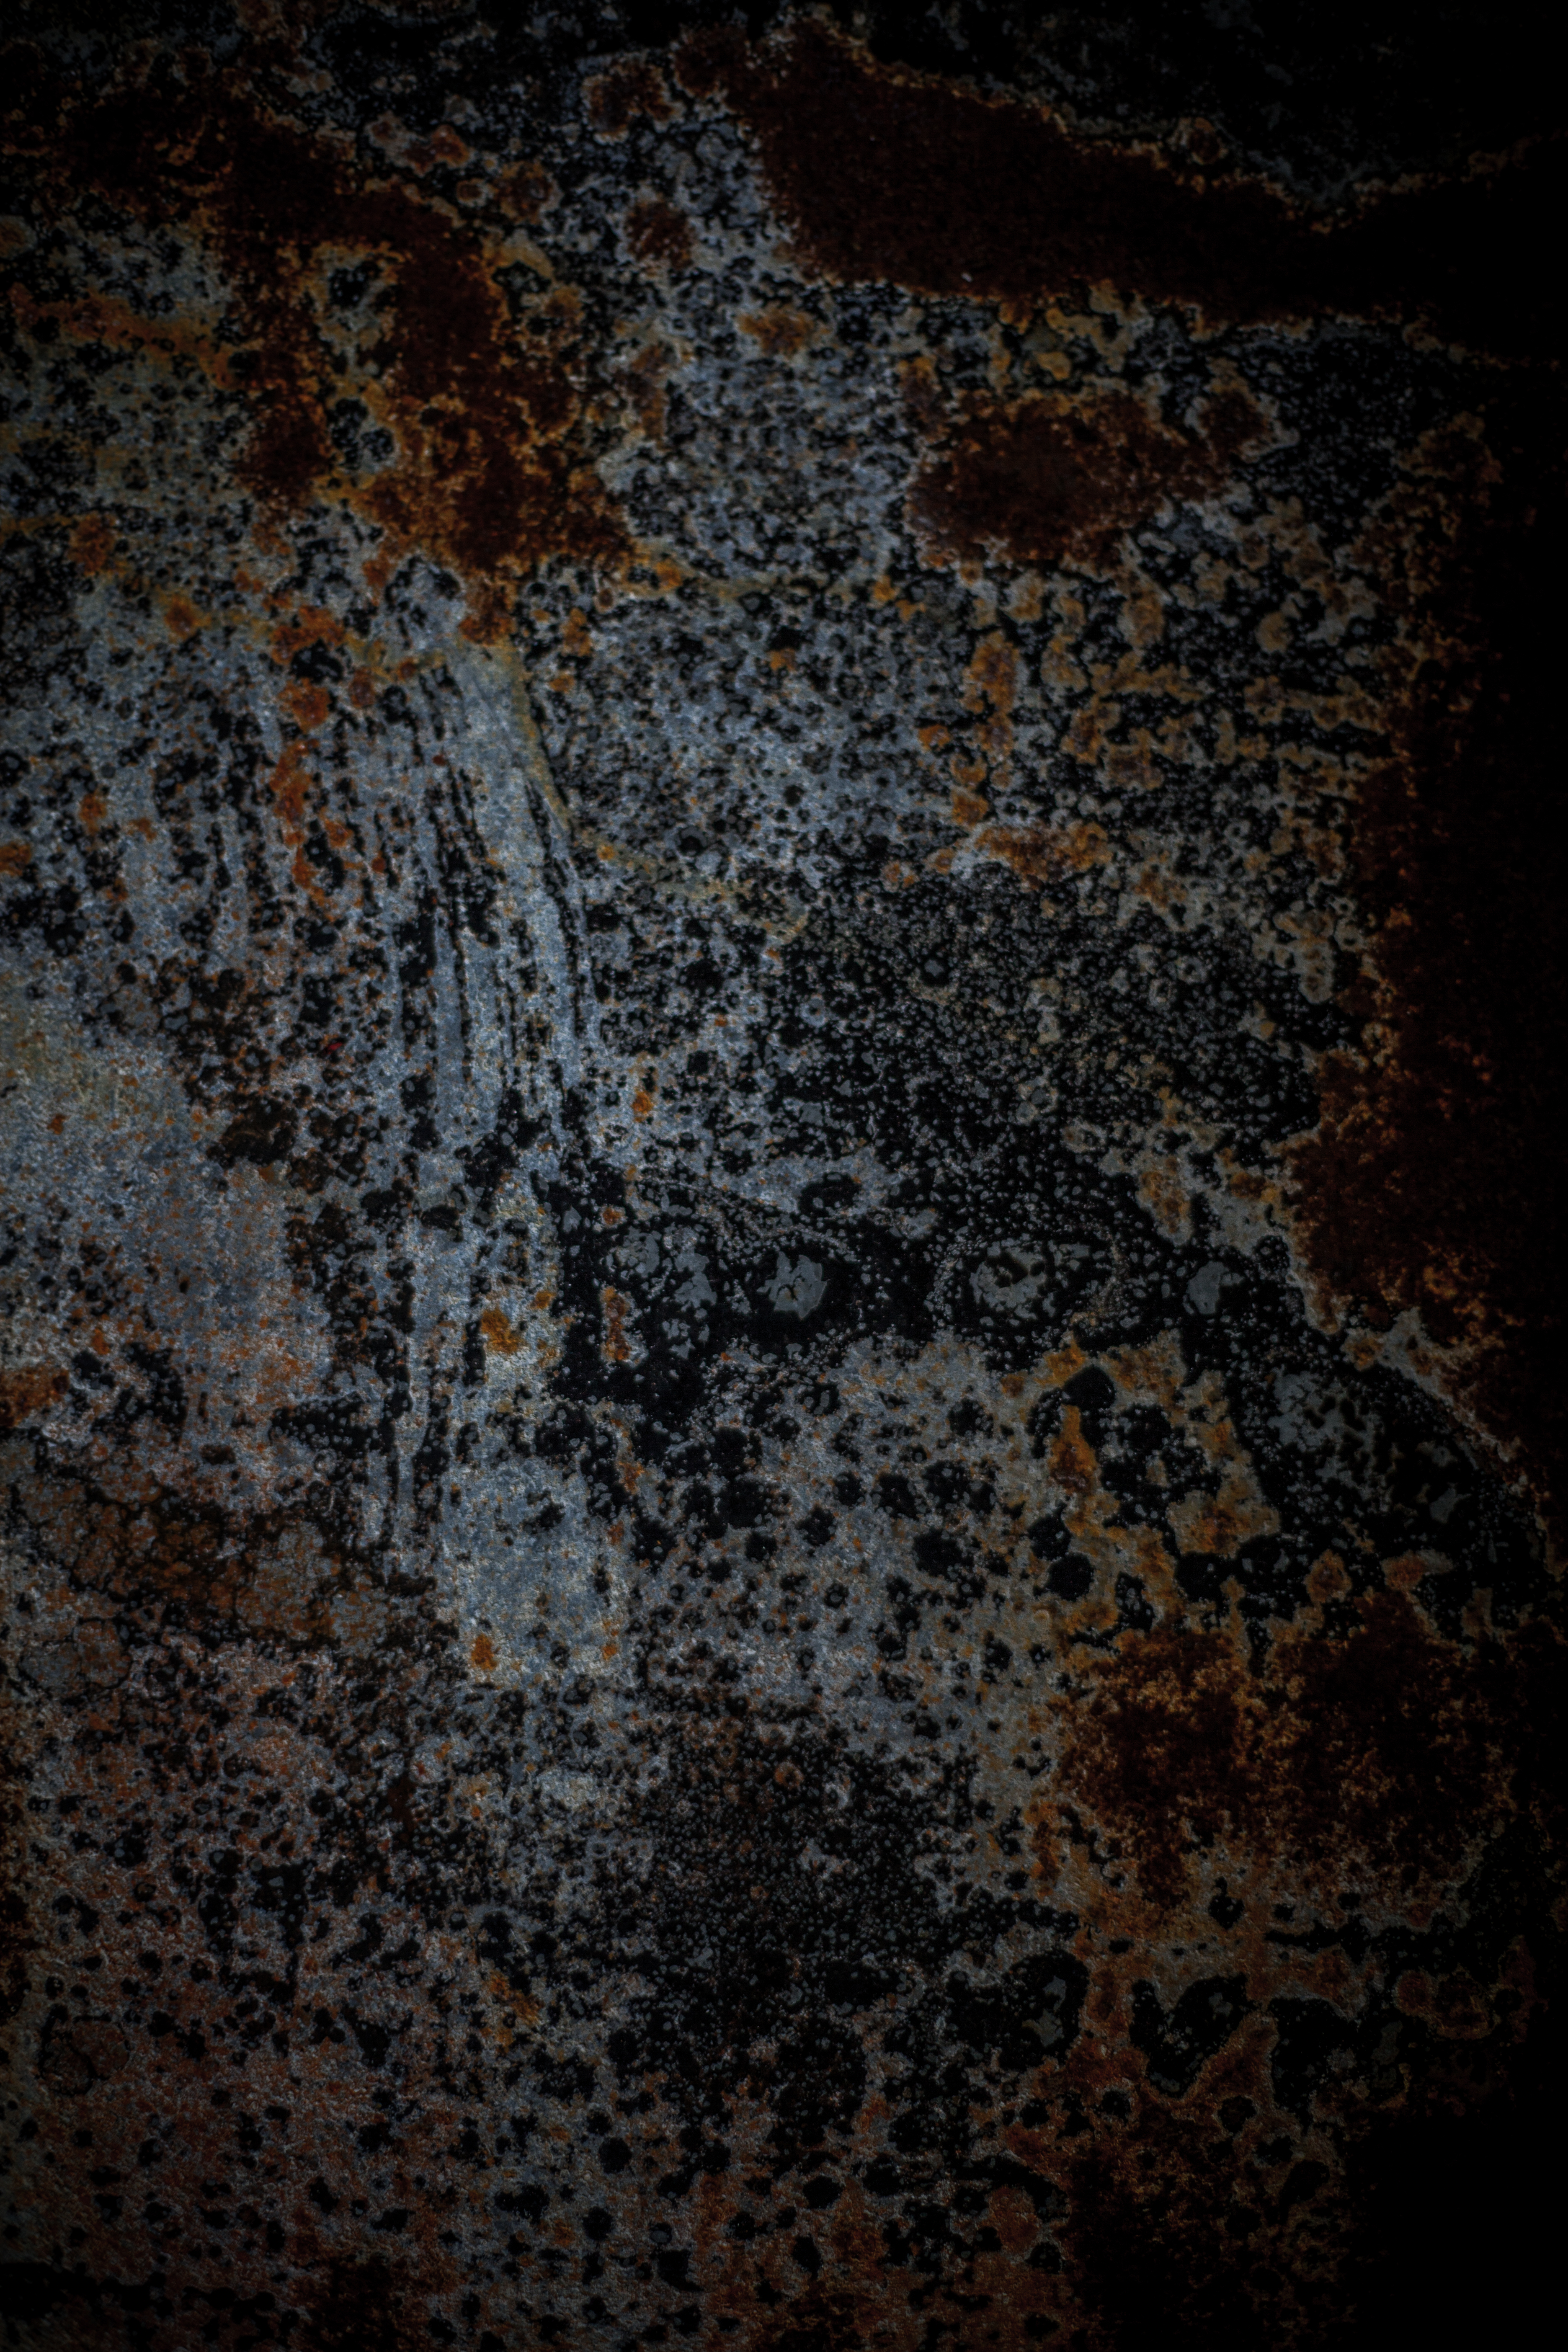 Gritty rust texture photo